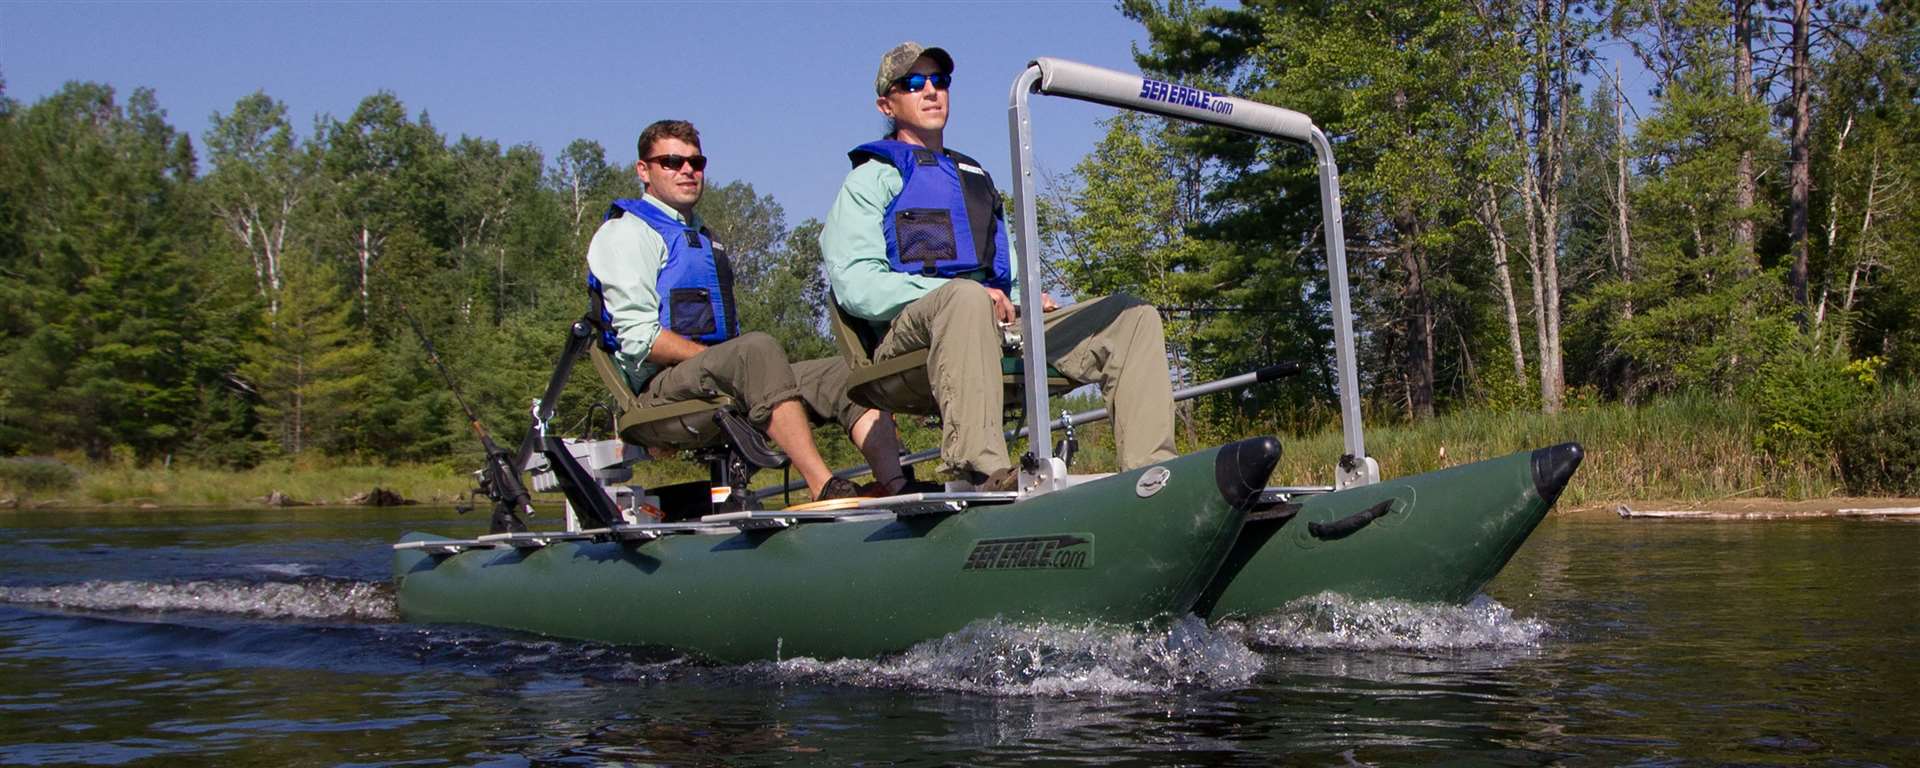 Sea Eagle Green 375fc Inflatable FoldCat Fishing Boat for sale